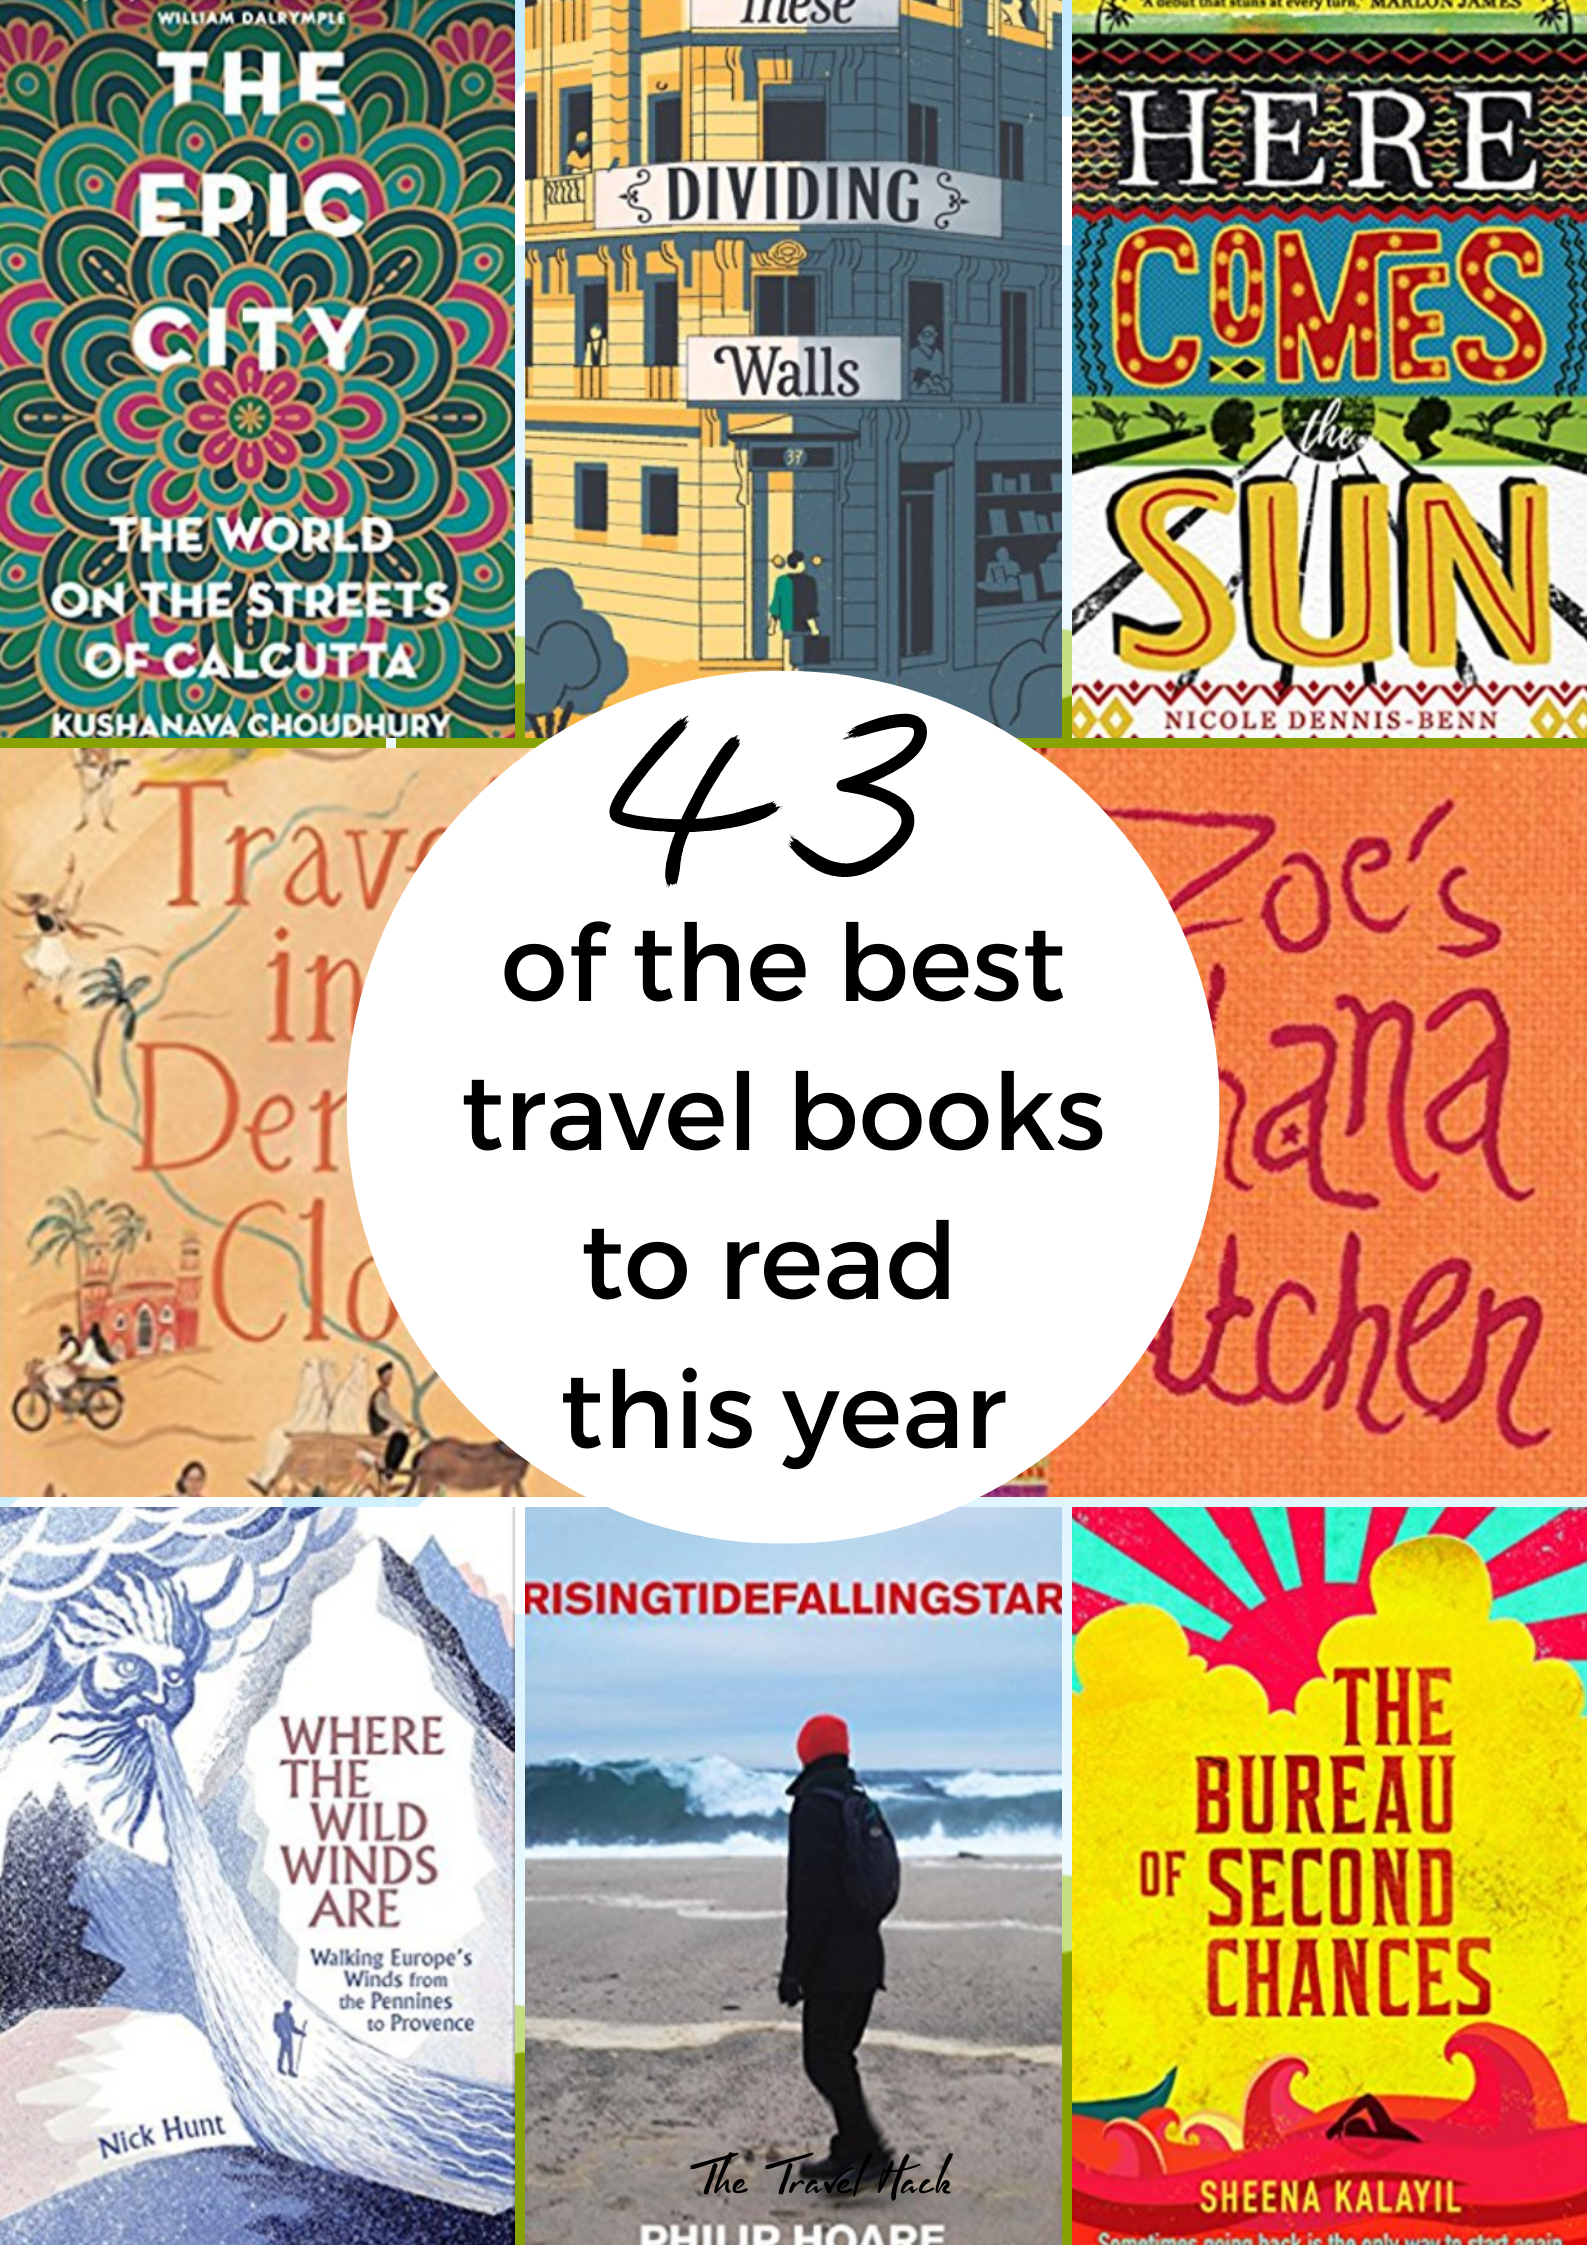 The 43 best travel books to read this year